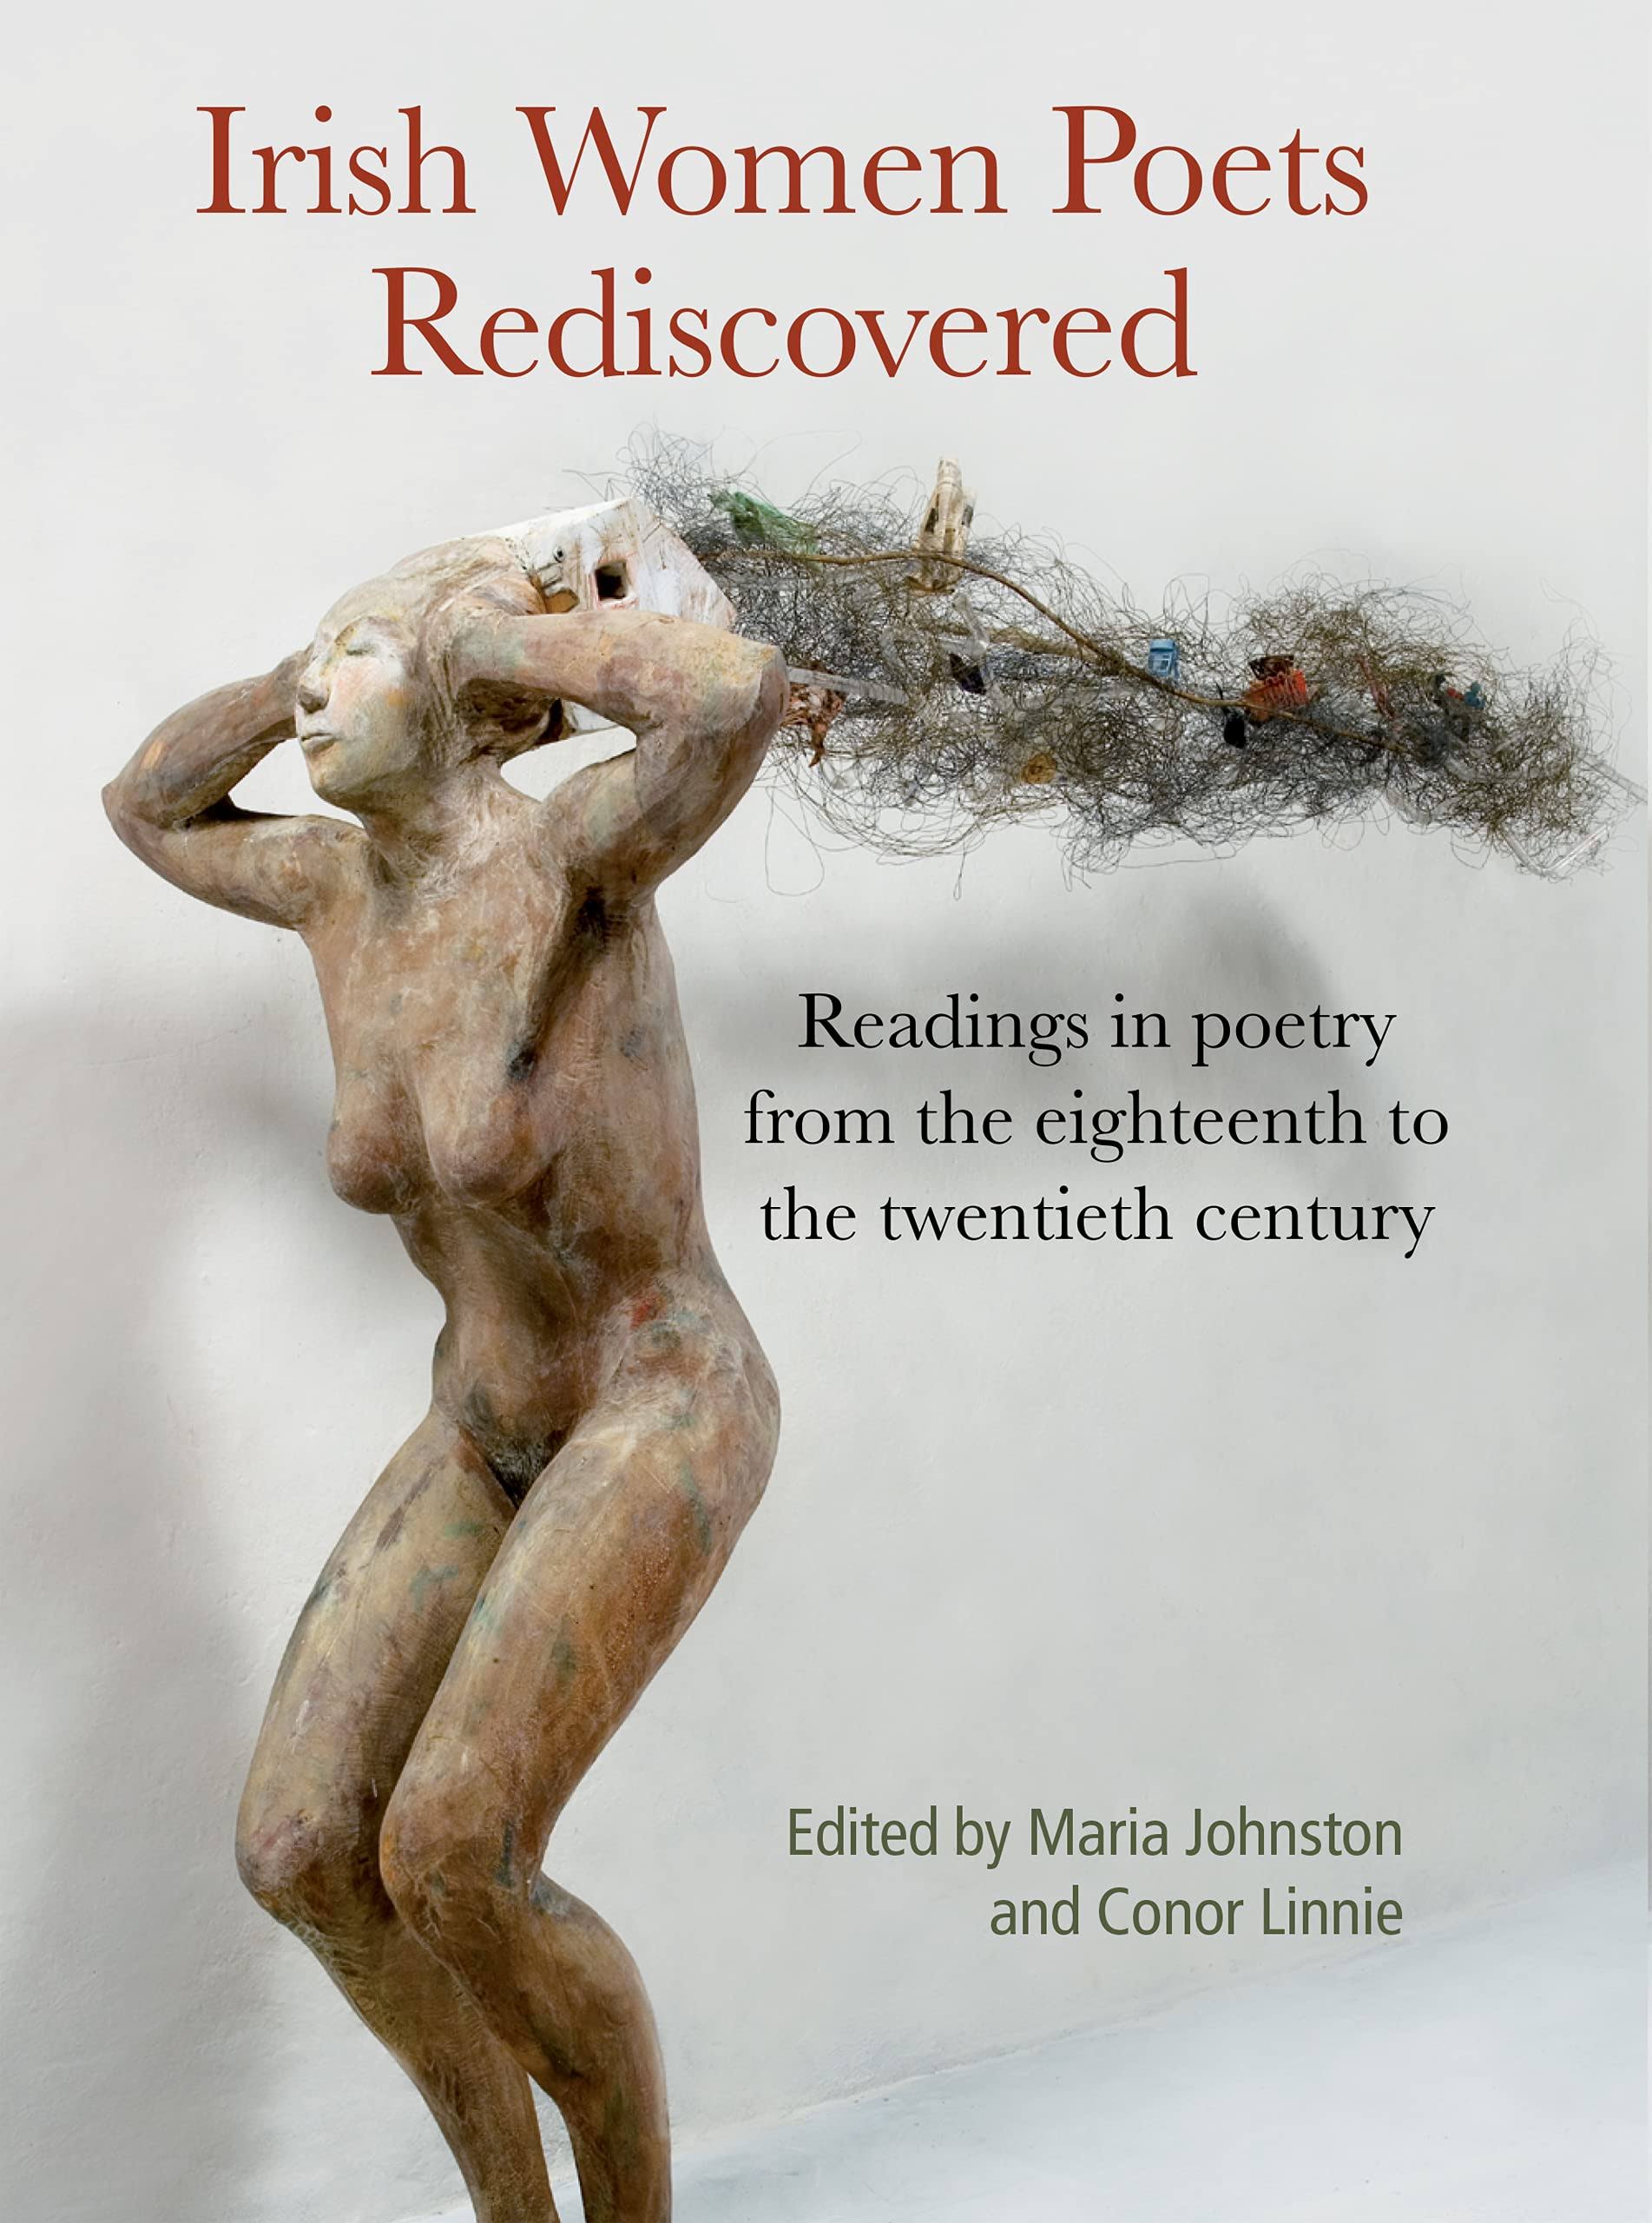 Irish Women Poets Rediscovered: Readings in Poetry from the Eighteenth to the Twentieth Century [Book]